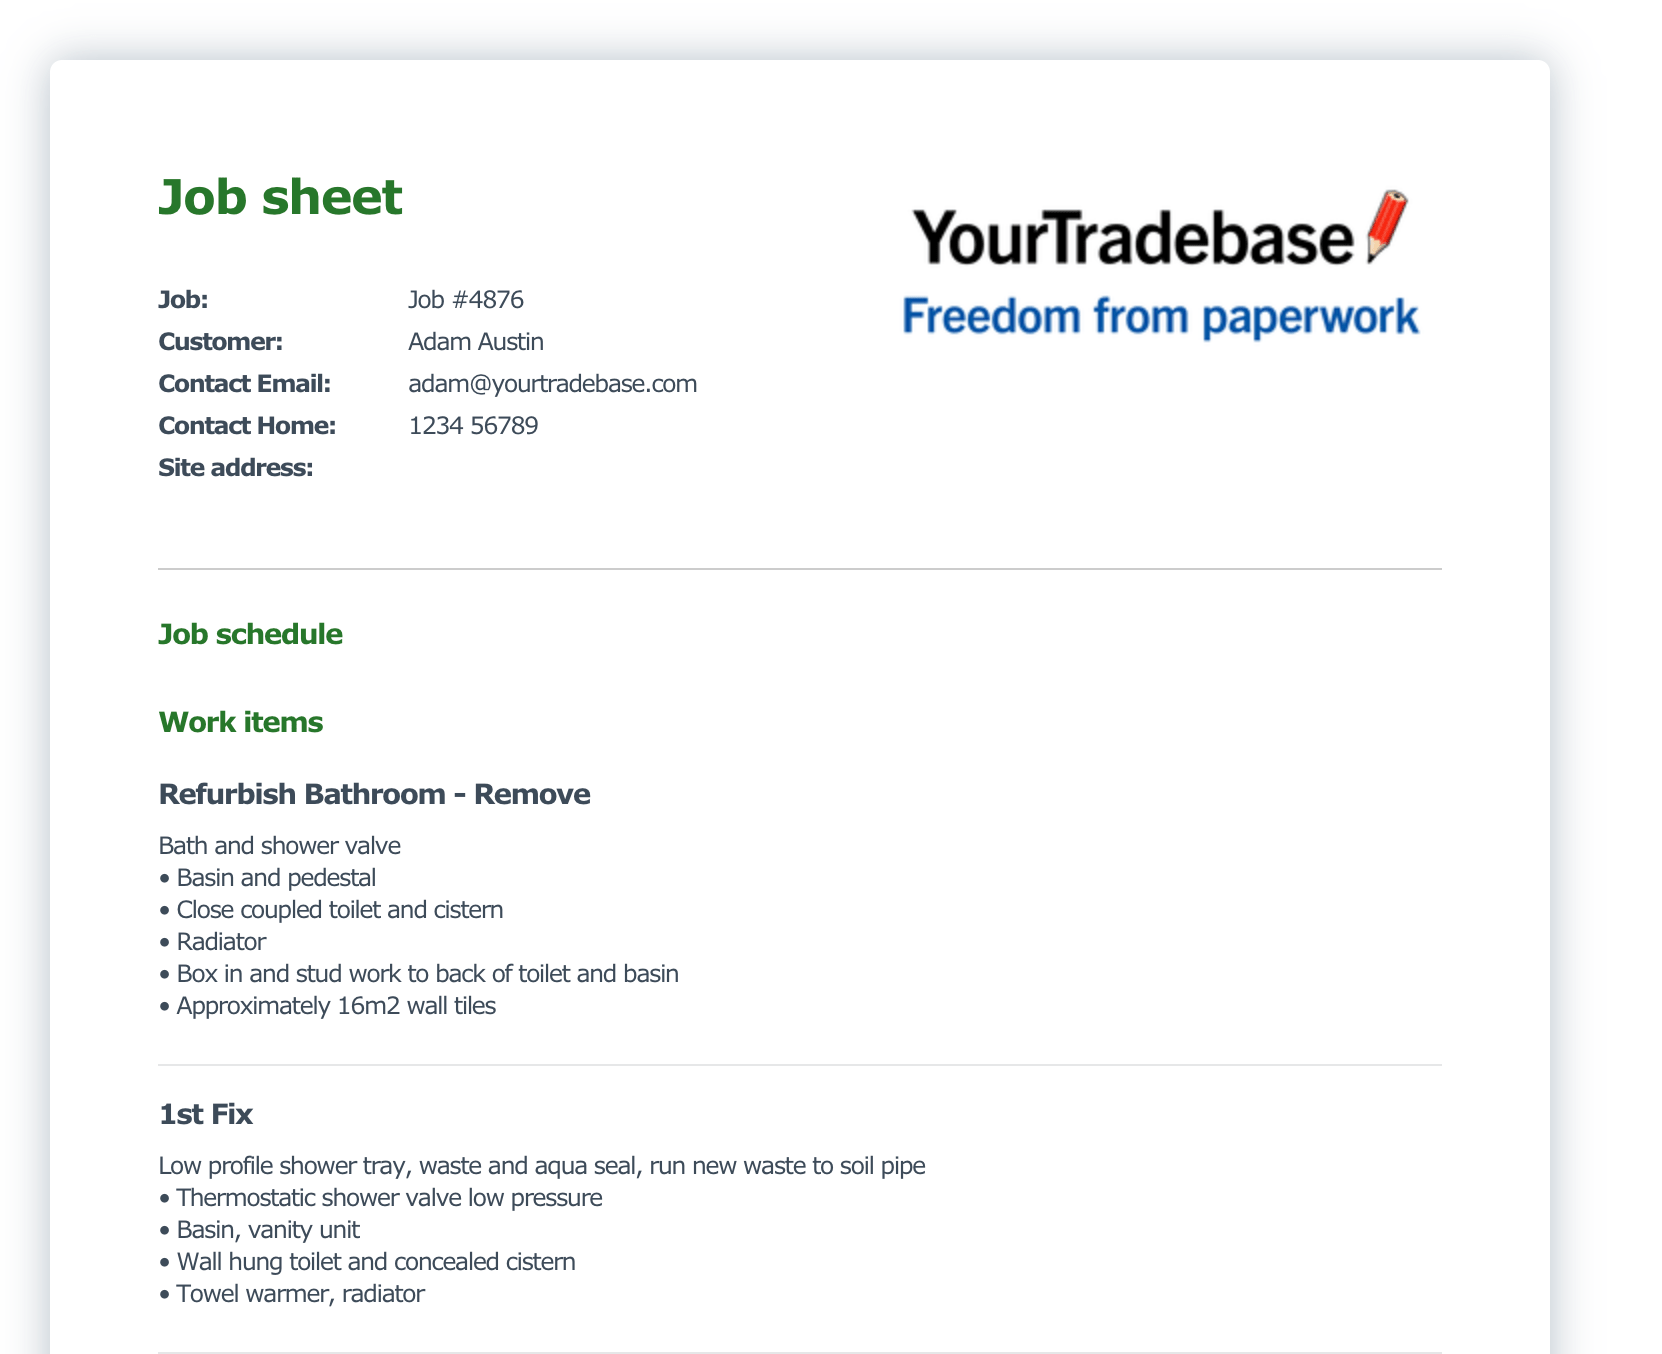 Details of every job on a job sheet